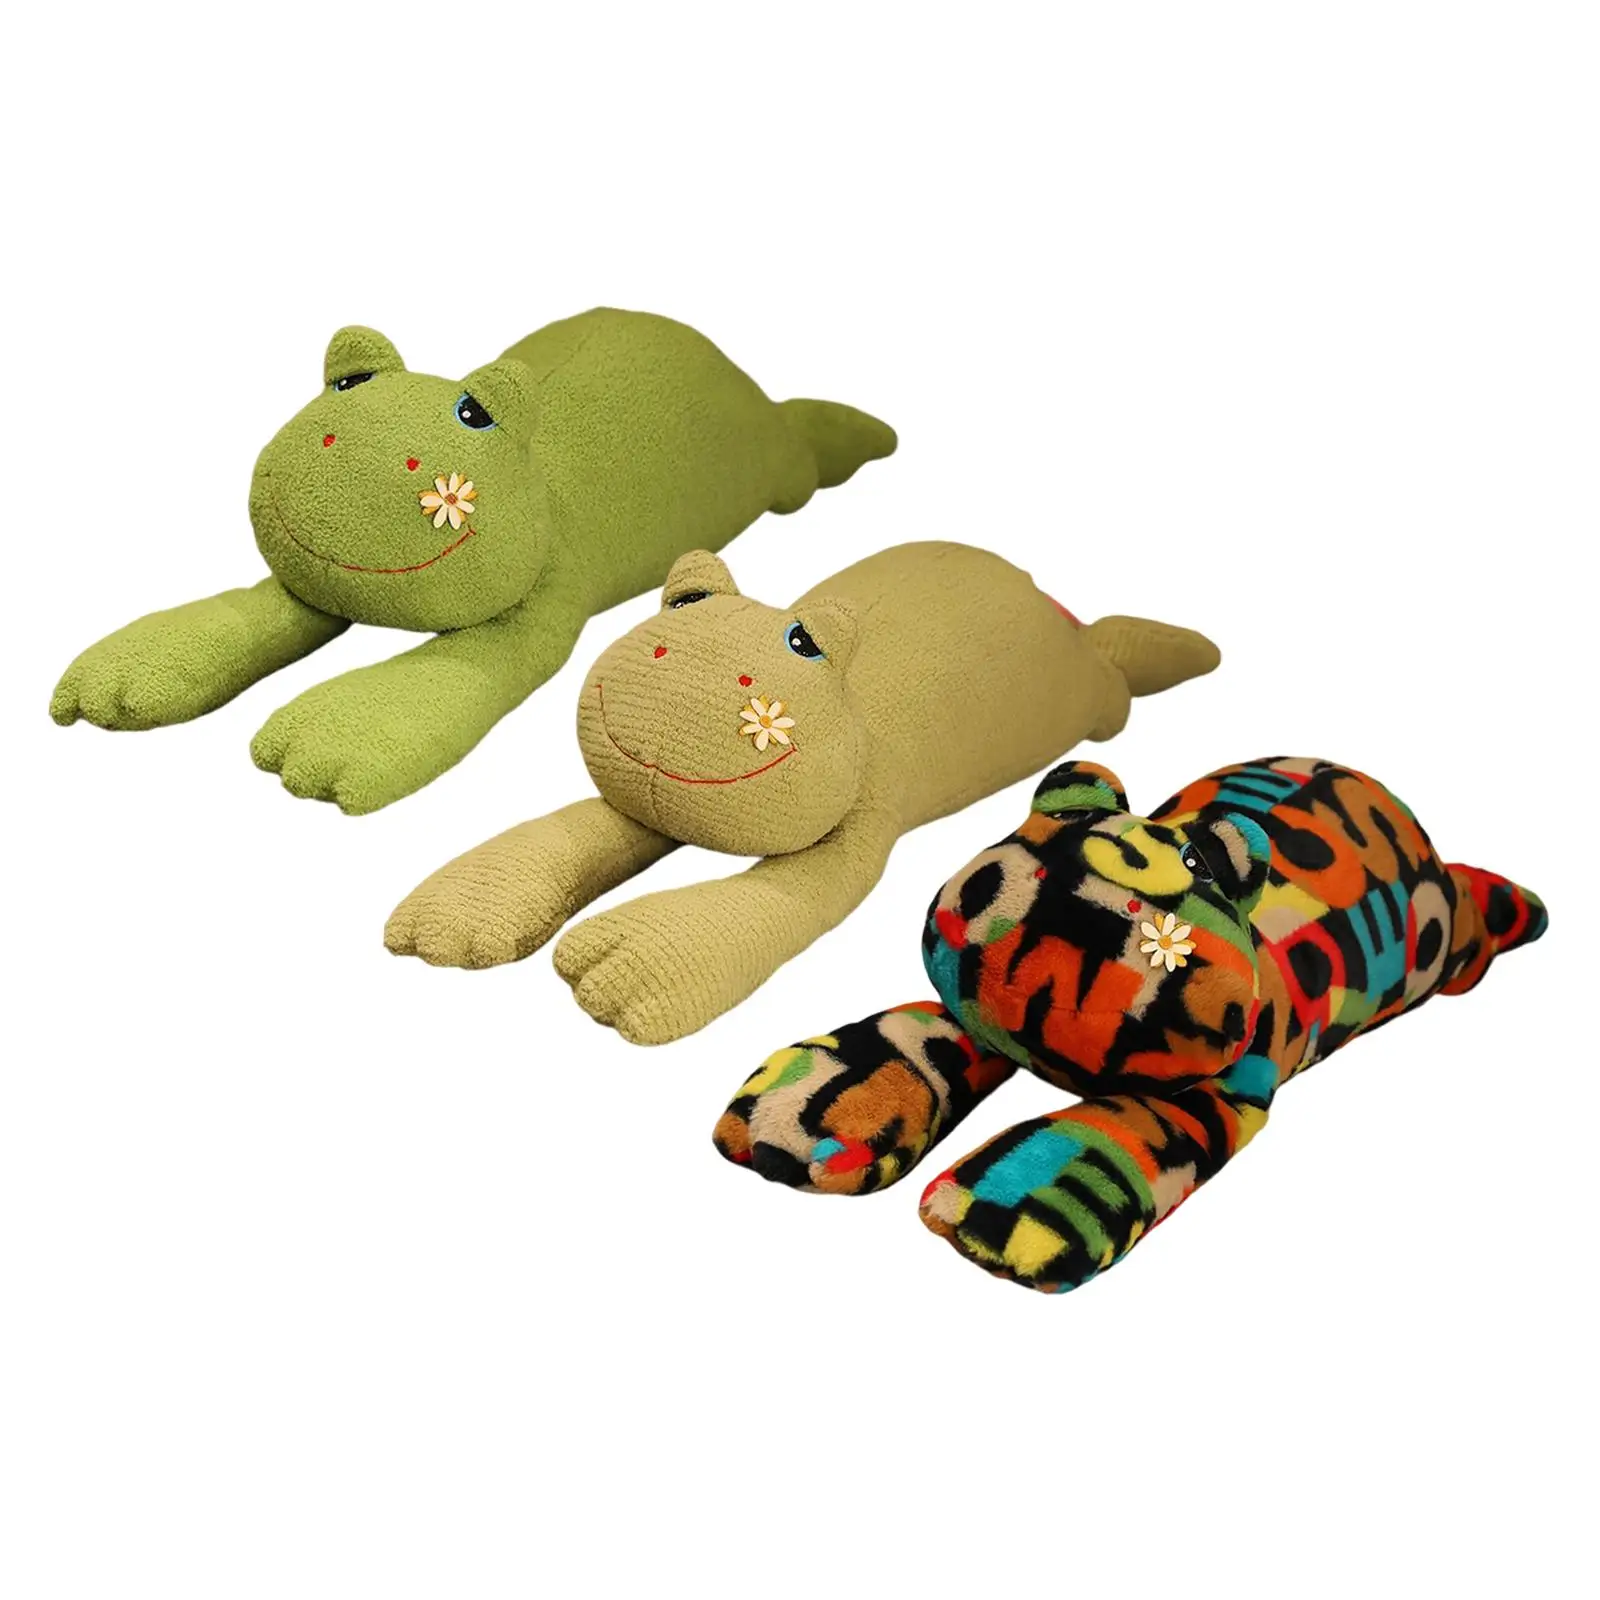 Adorable Frog Plush Doll Cushion Frog Pillow , Soft Stuffed Animal for Birthday Gifts